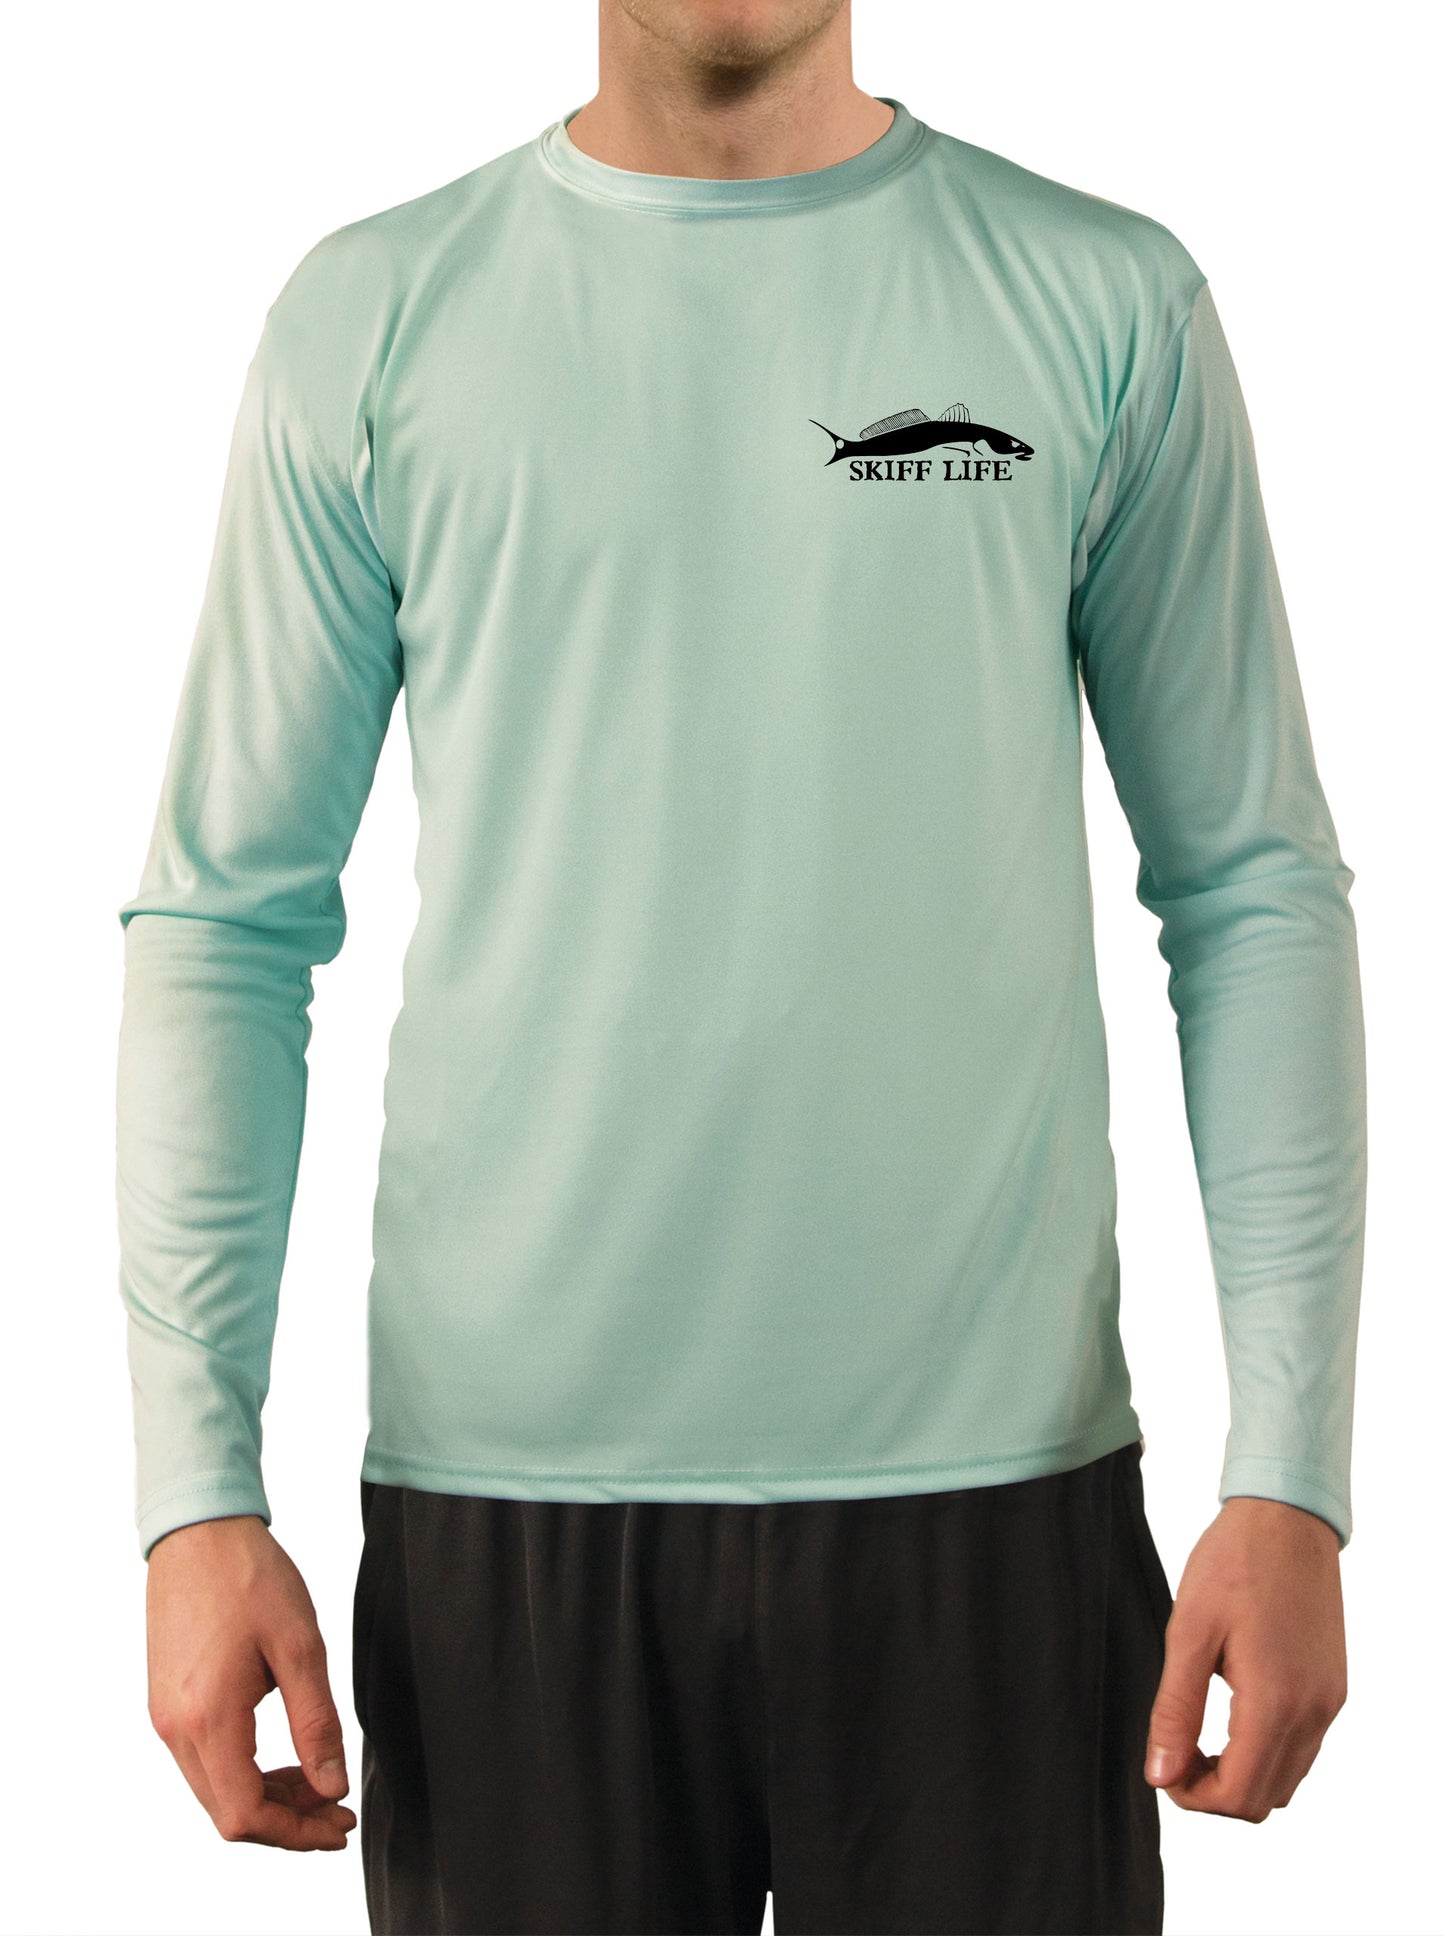 East Coast Mullet Snook Fishing Shirts with Optional Sleeve: Florida Flag or Snook Scale - Skiff Life